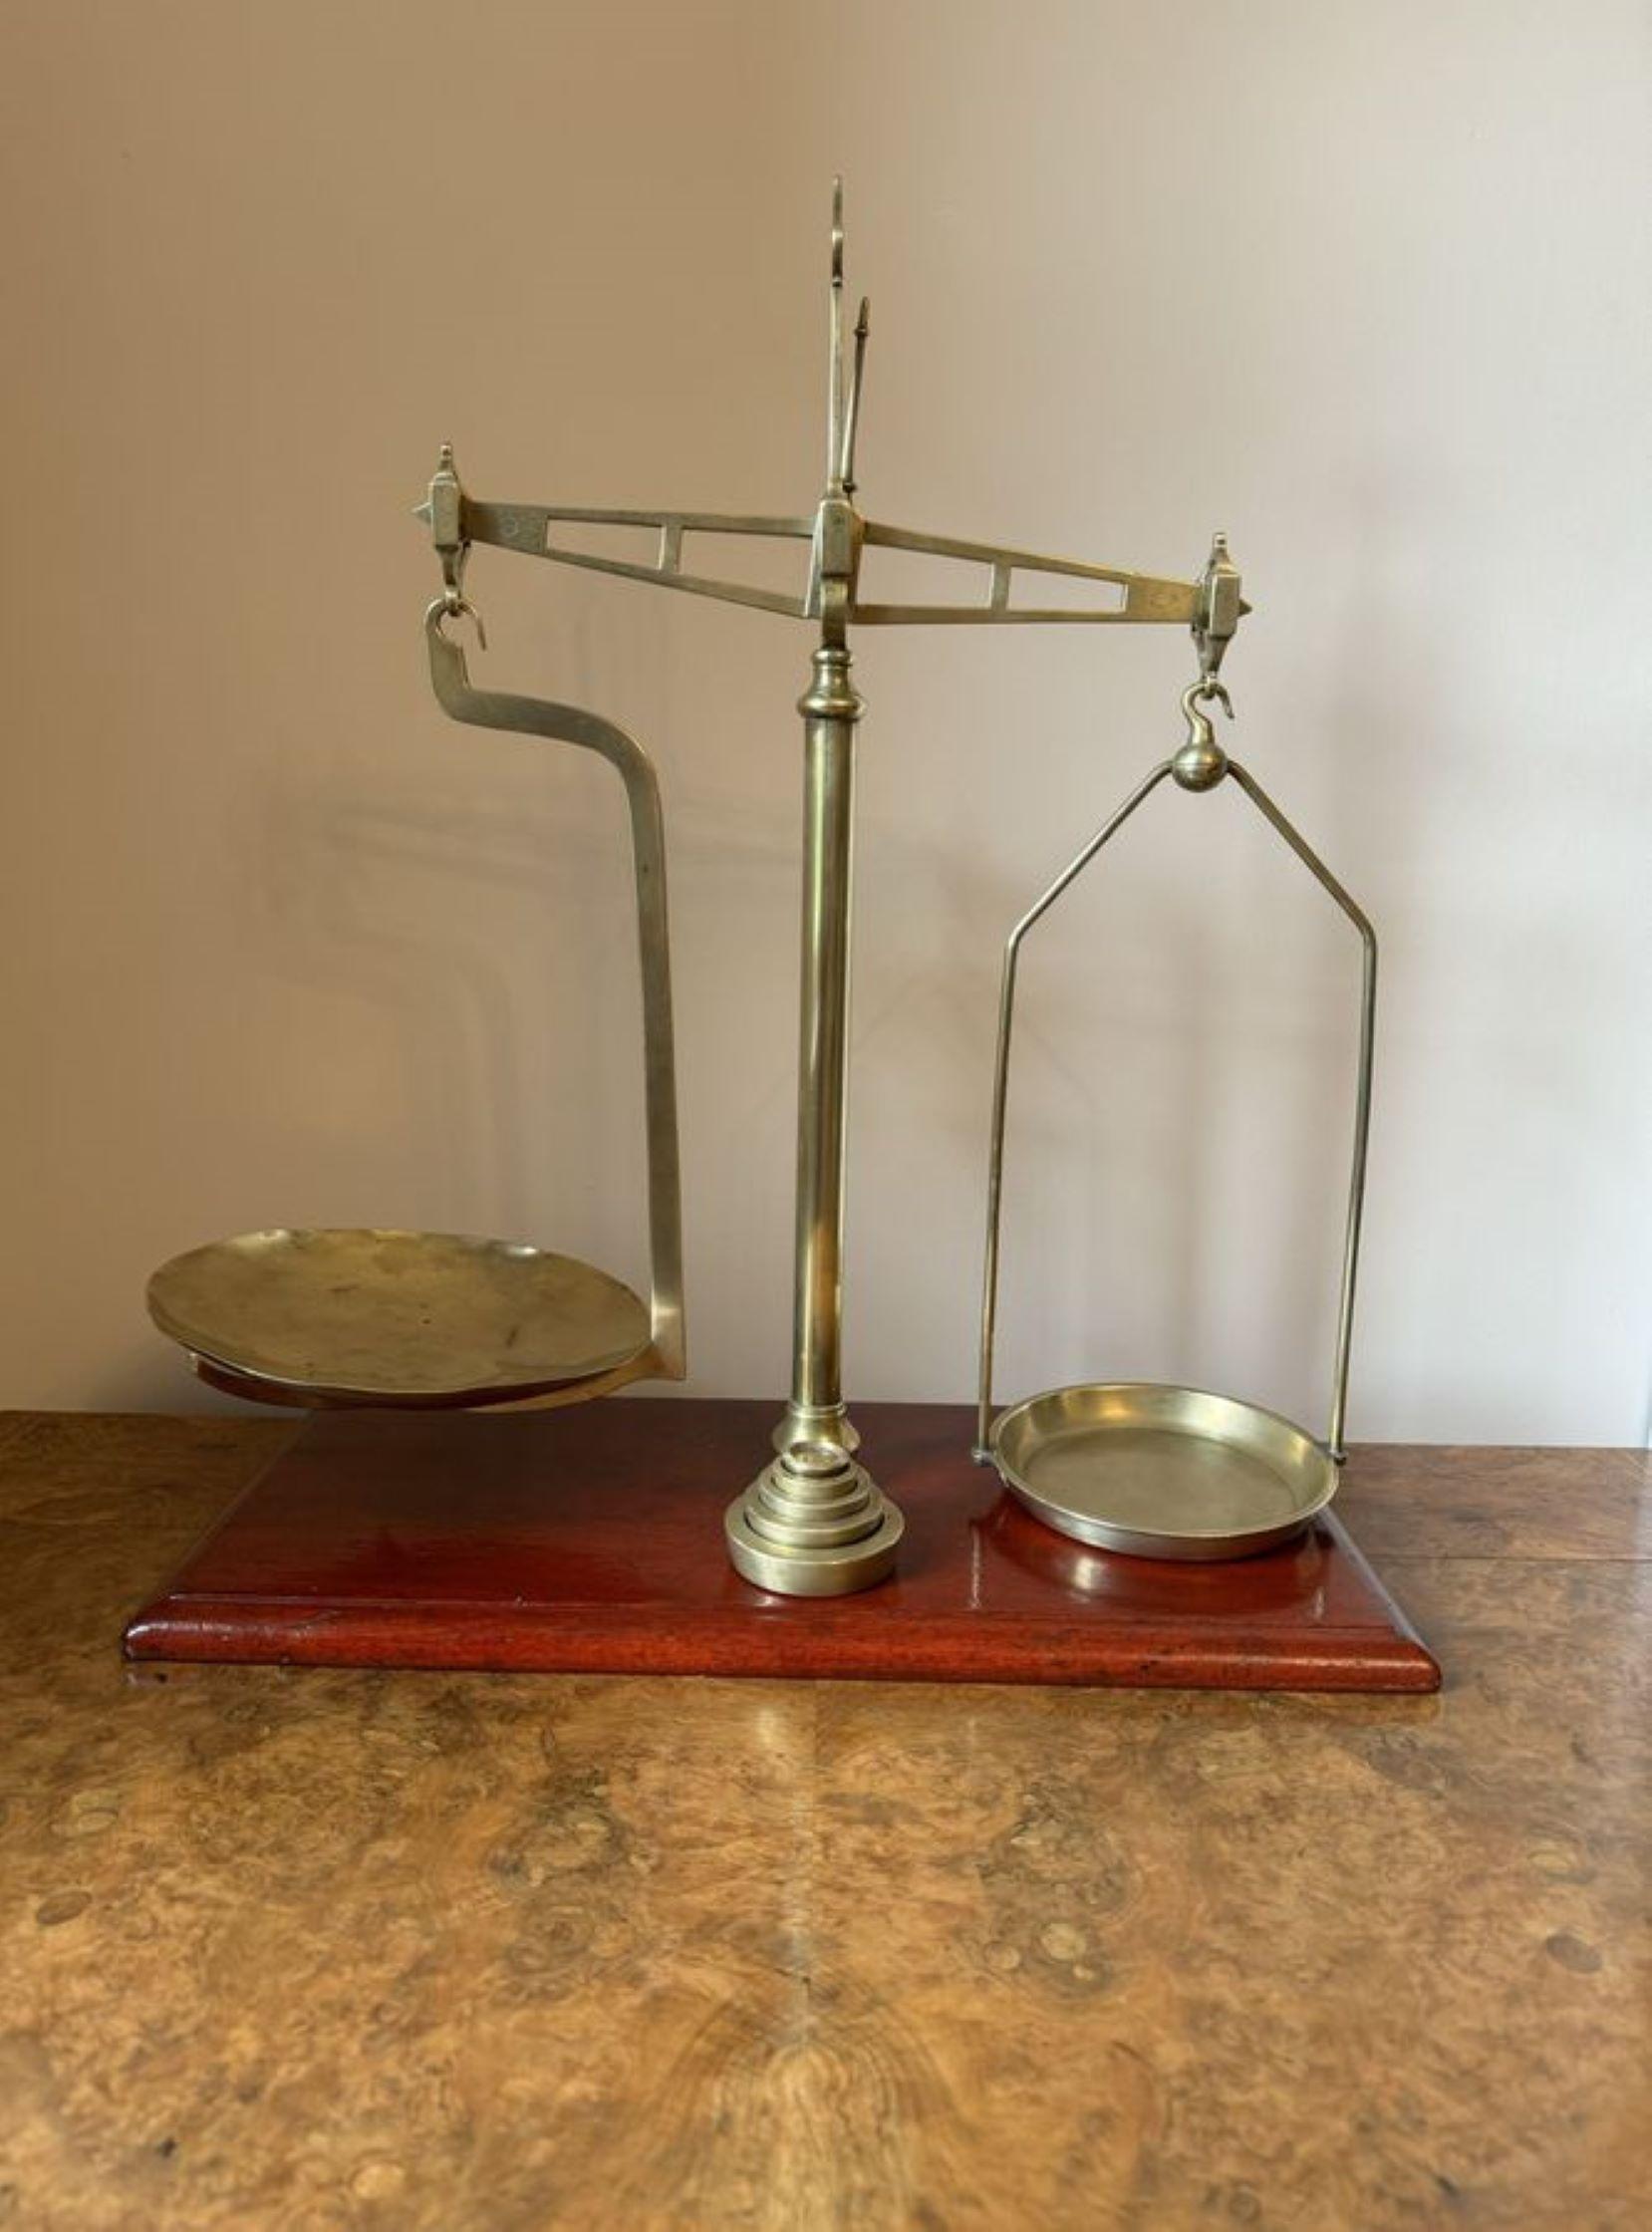 Quality large pair of Victorian scales by Parnall & Sons of Bristol, having a brass centre column mounted upon a wooden base, with a shaped brass arm holding brass weighing pans, Marked Parnell & Sons to the frame. Accompanied with a set of brass